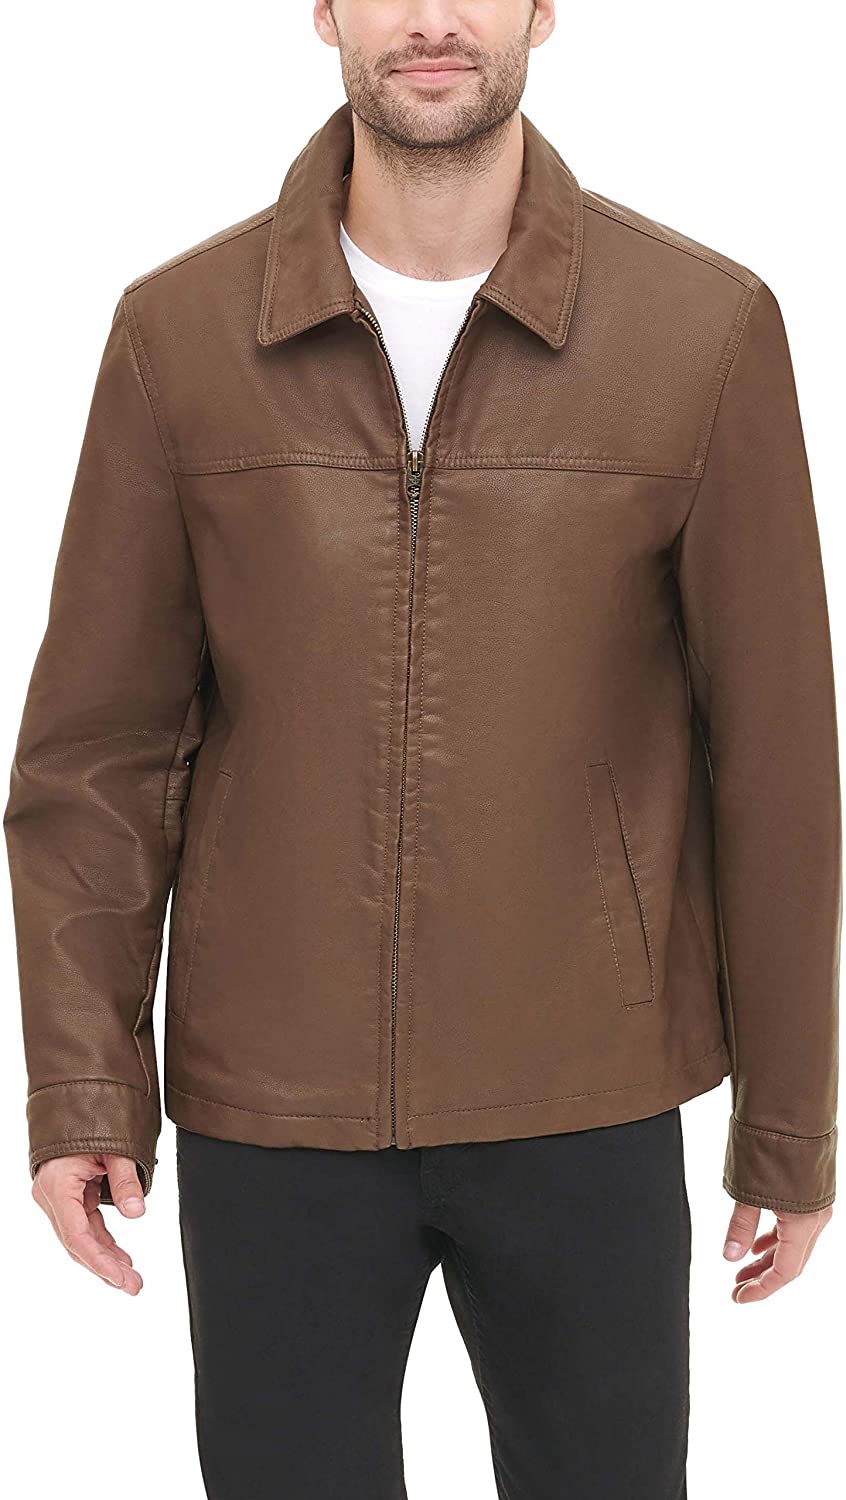 Dockers Men's Faux Leather Jacket (Standard and Big & Tall)